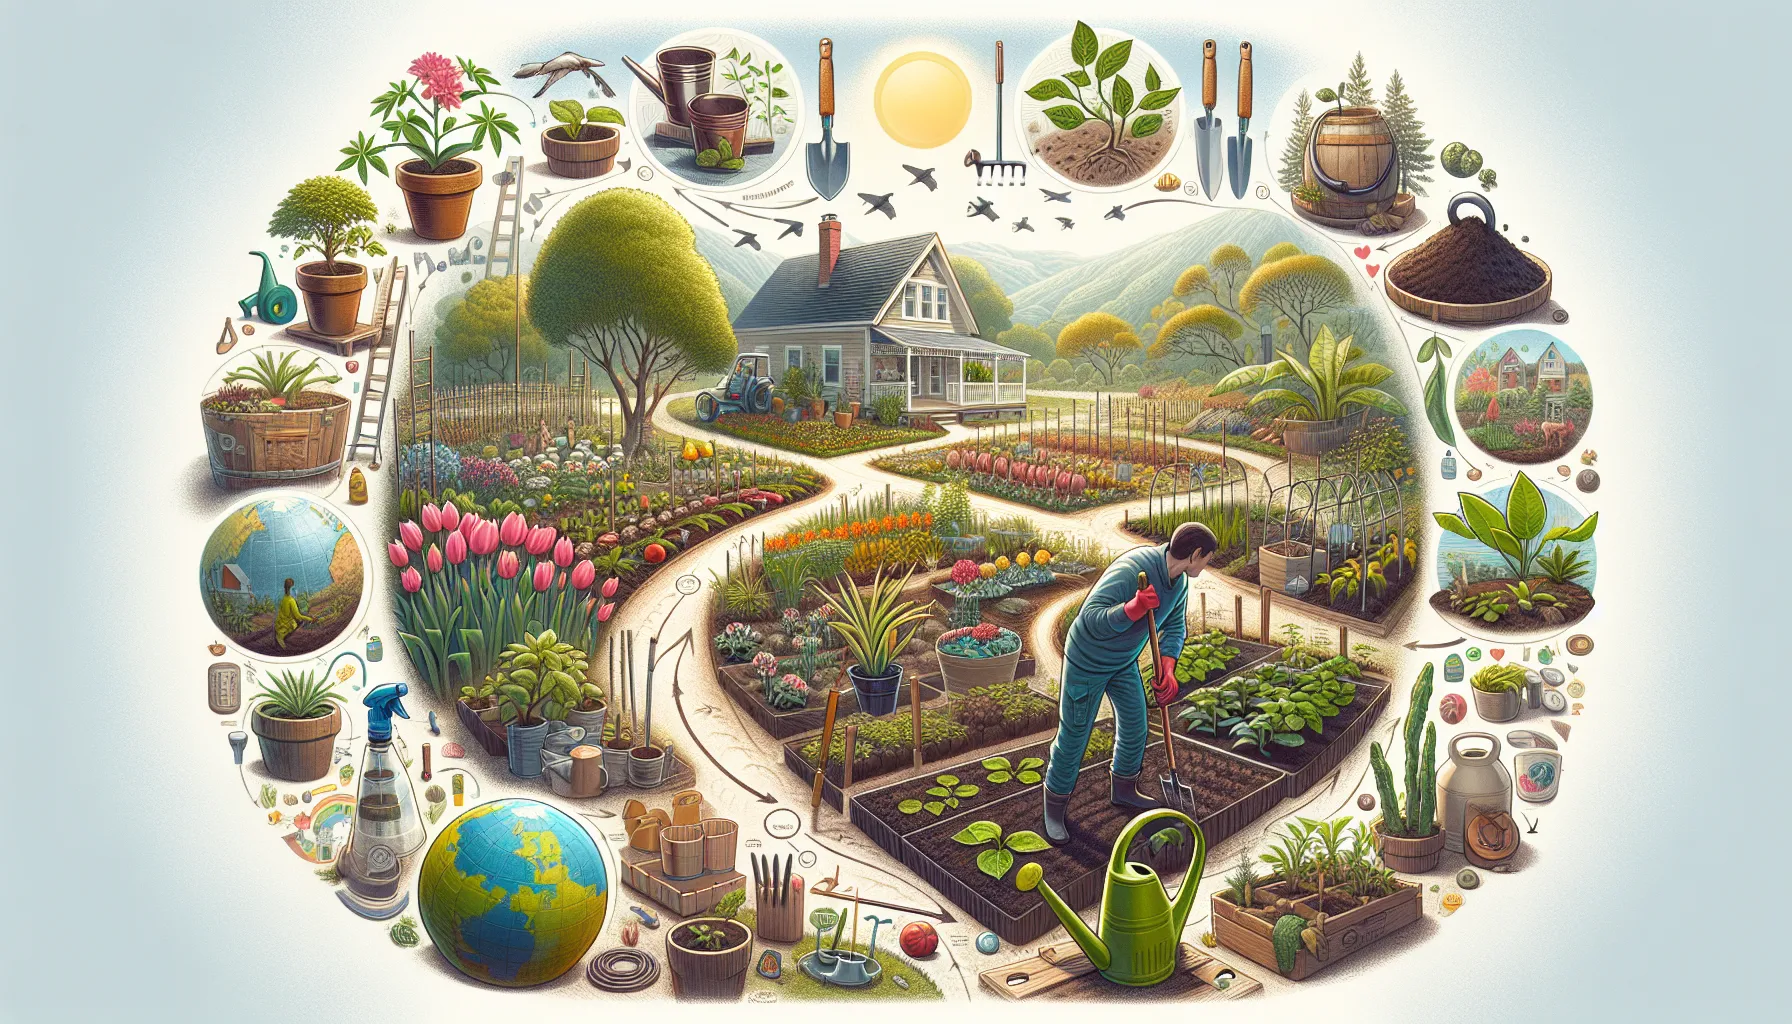 A person tends to vegetable beds in a vibrant home gardening scene, surrounded by a variety of plants, gardening tools, and whimsical representations of the ecosystem.